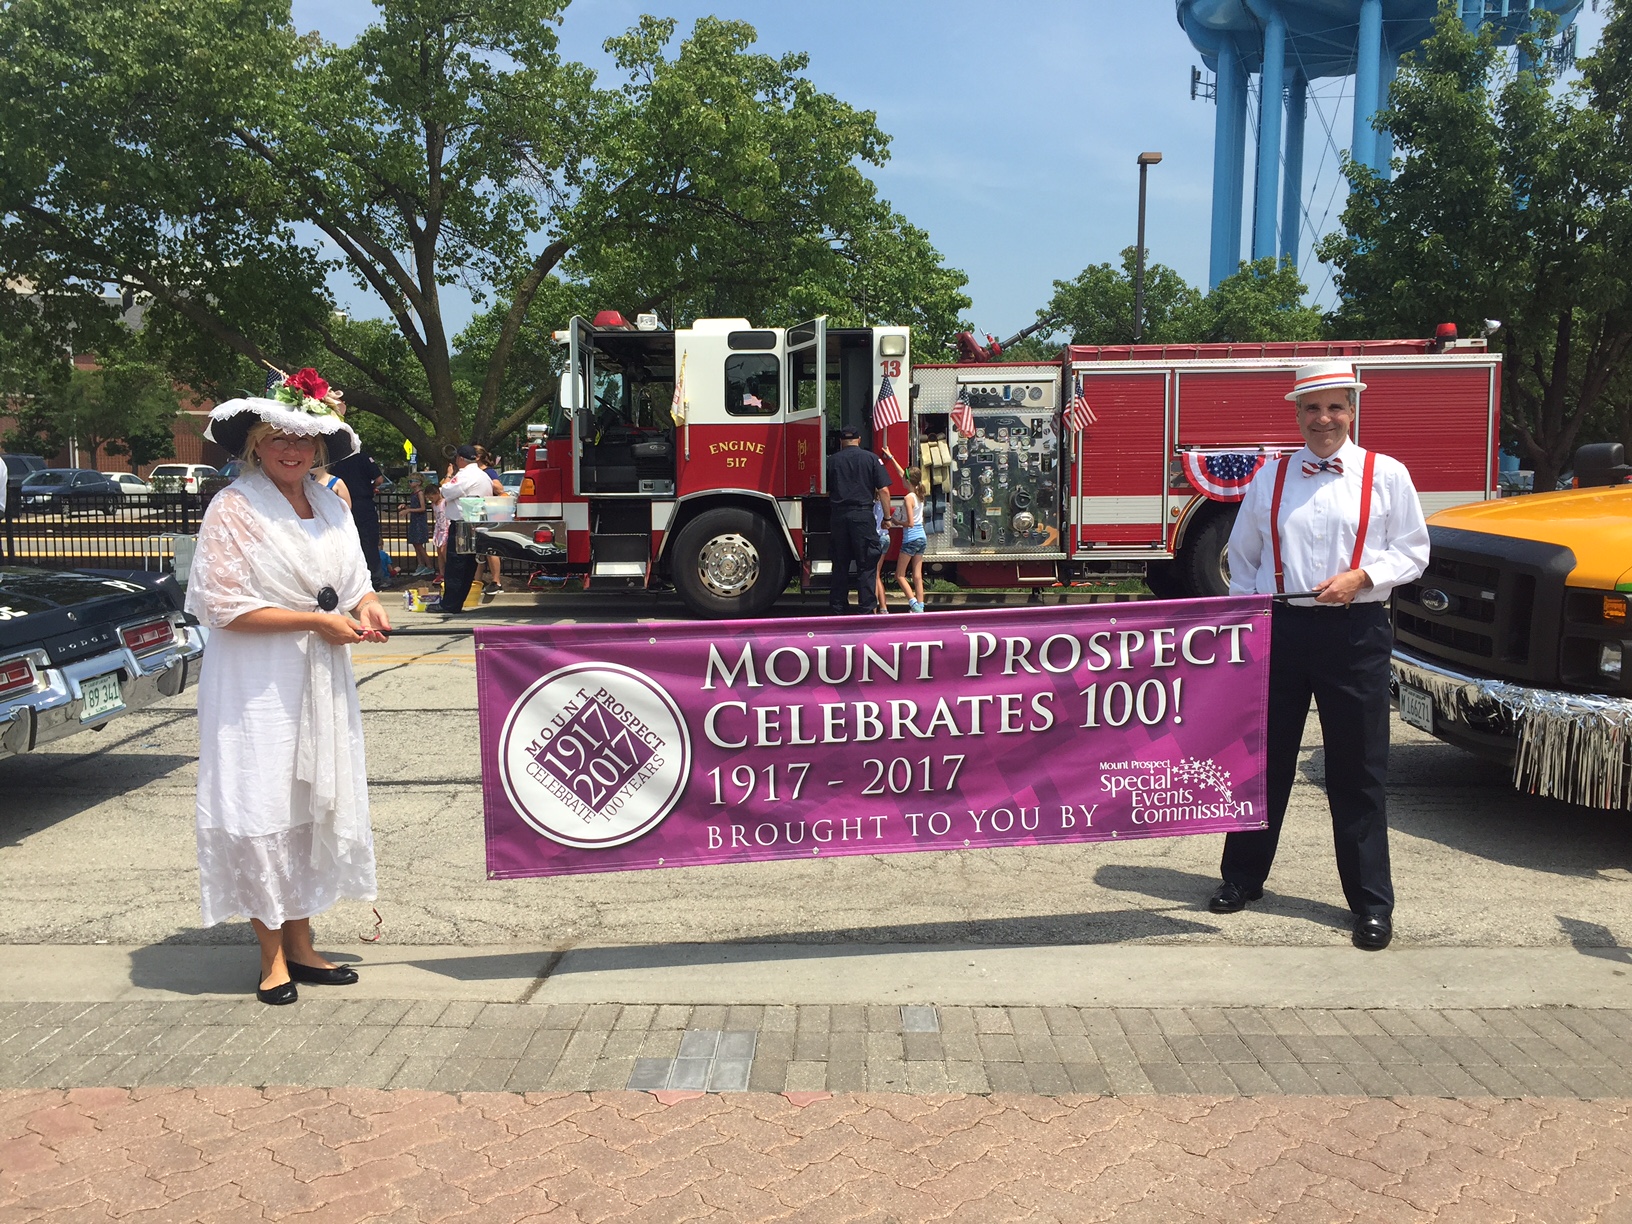 A beautiful 4th for a Parade! Mount Prospect Historical Society